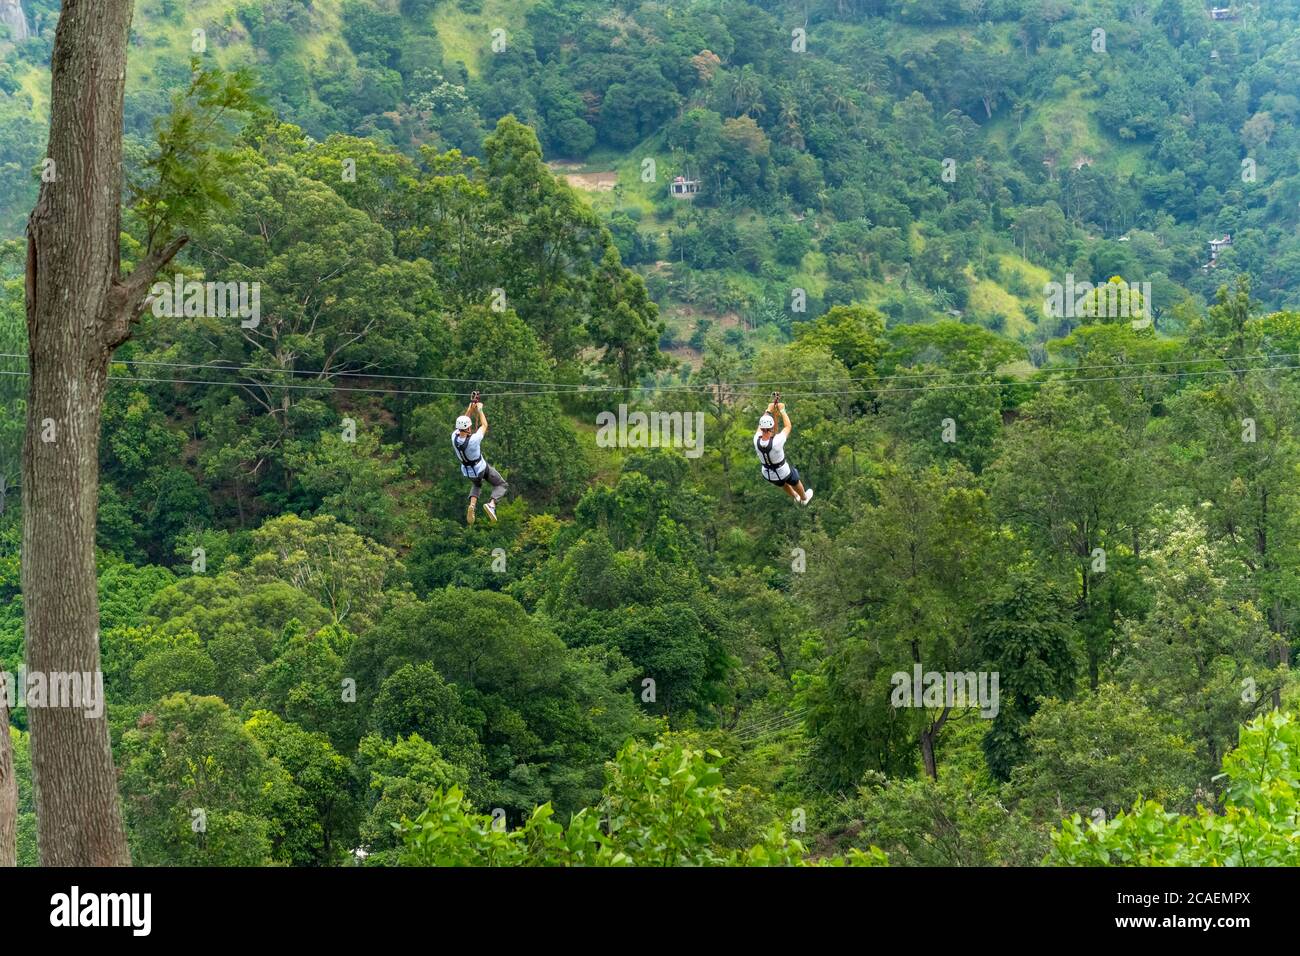 Men going on a zipline in the jungle. tree climbing in Sri Lanka. adventure , challenge and sport concept Stock Photo